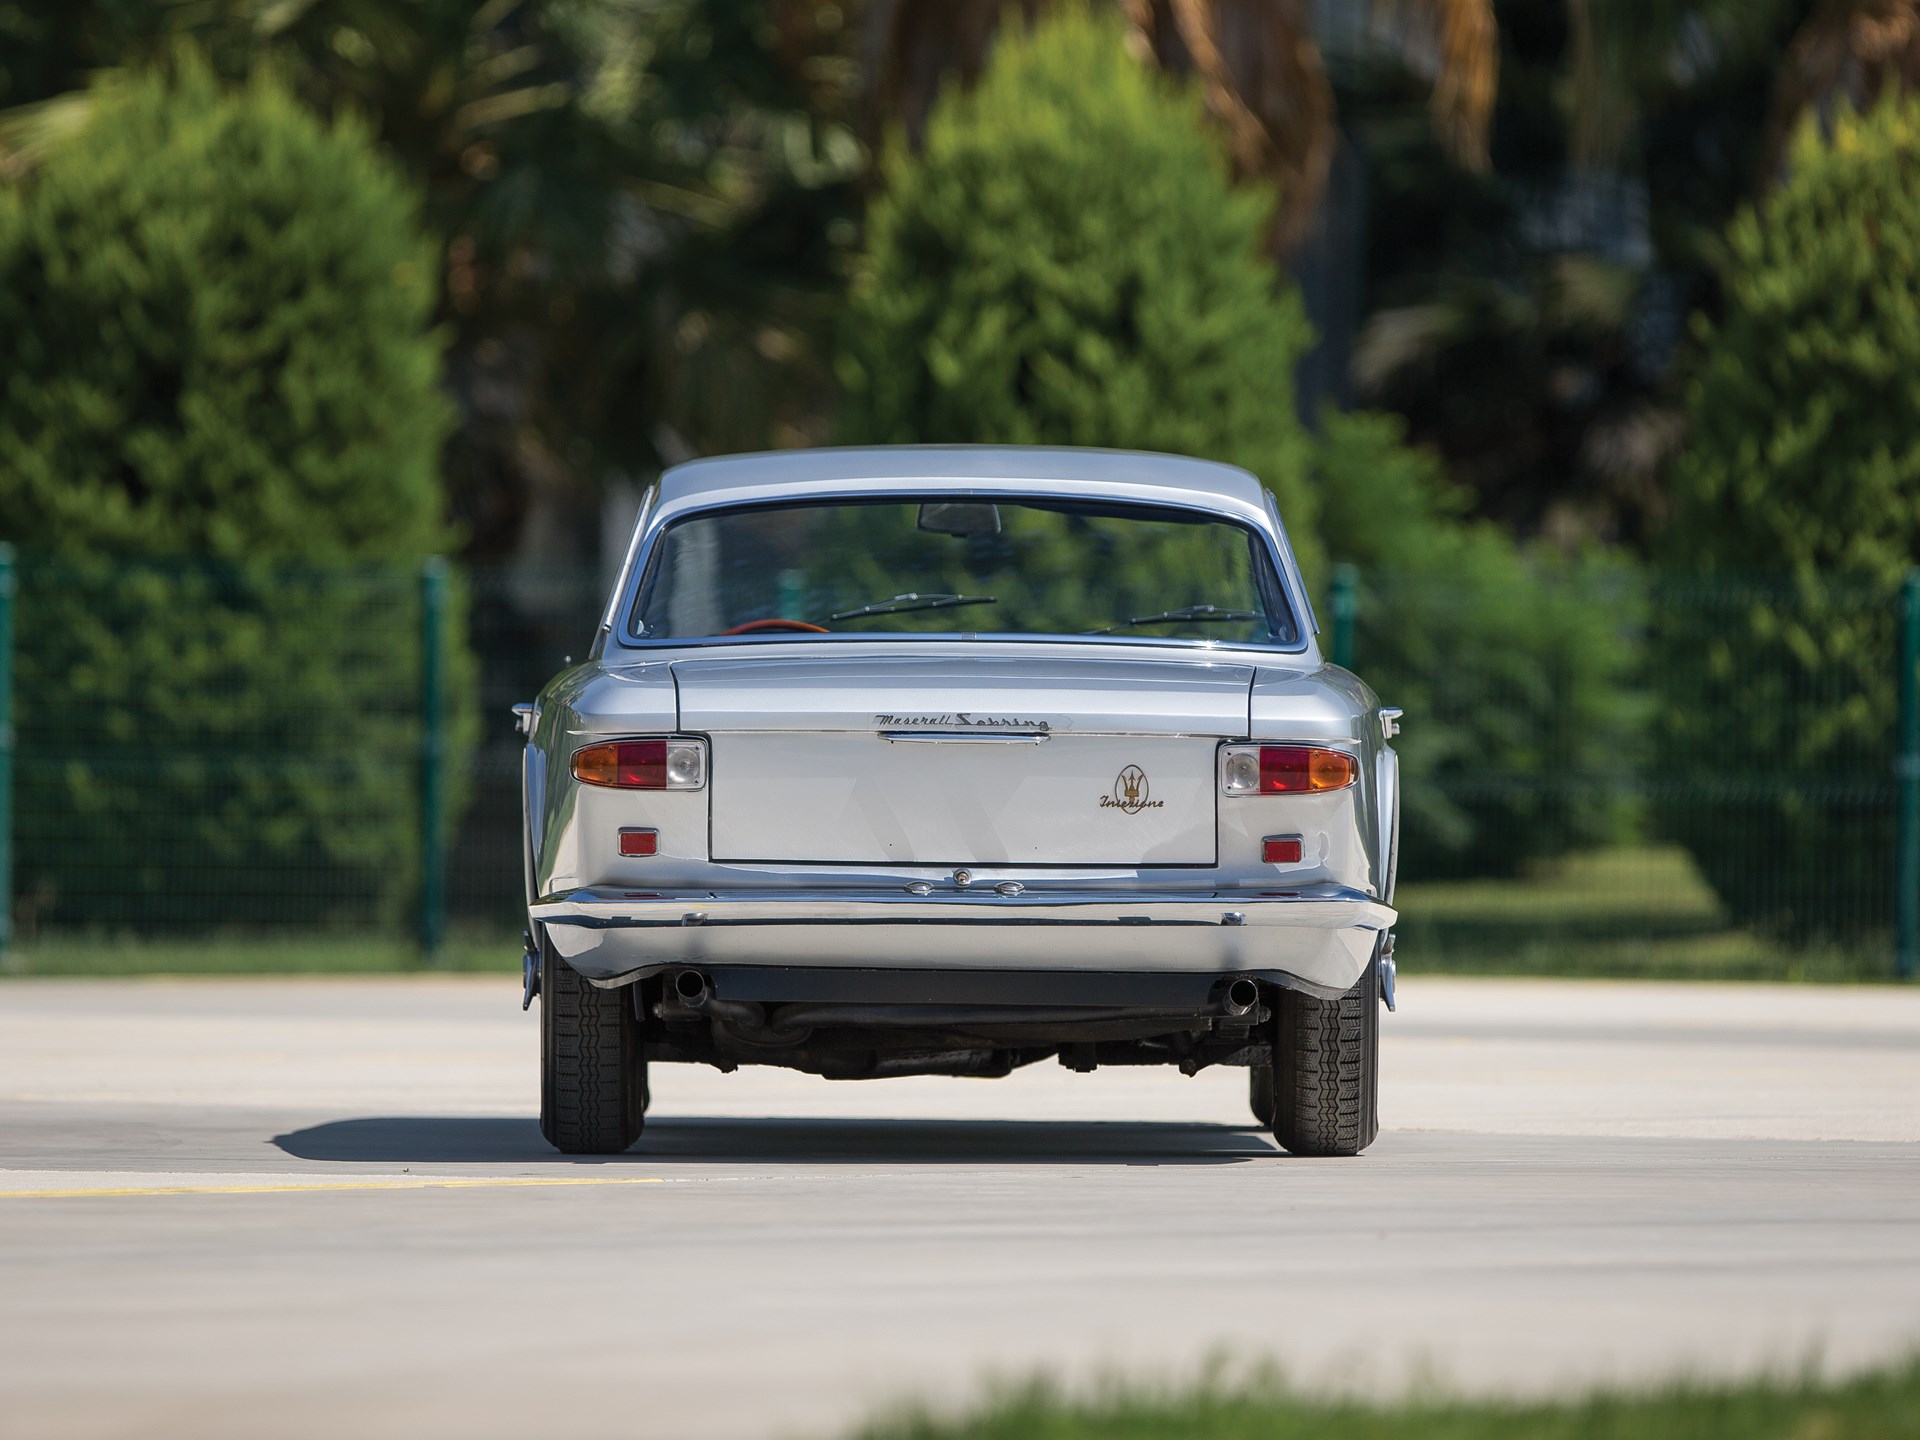 RM Sotheby's - 1967 Maserati Sebring 3700 GTi Series II by ...